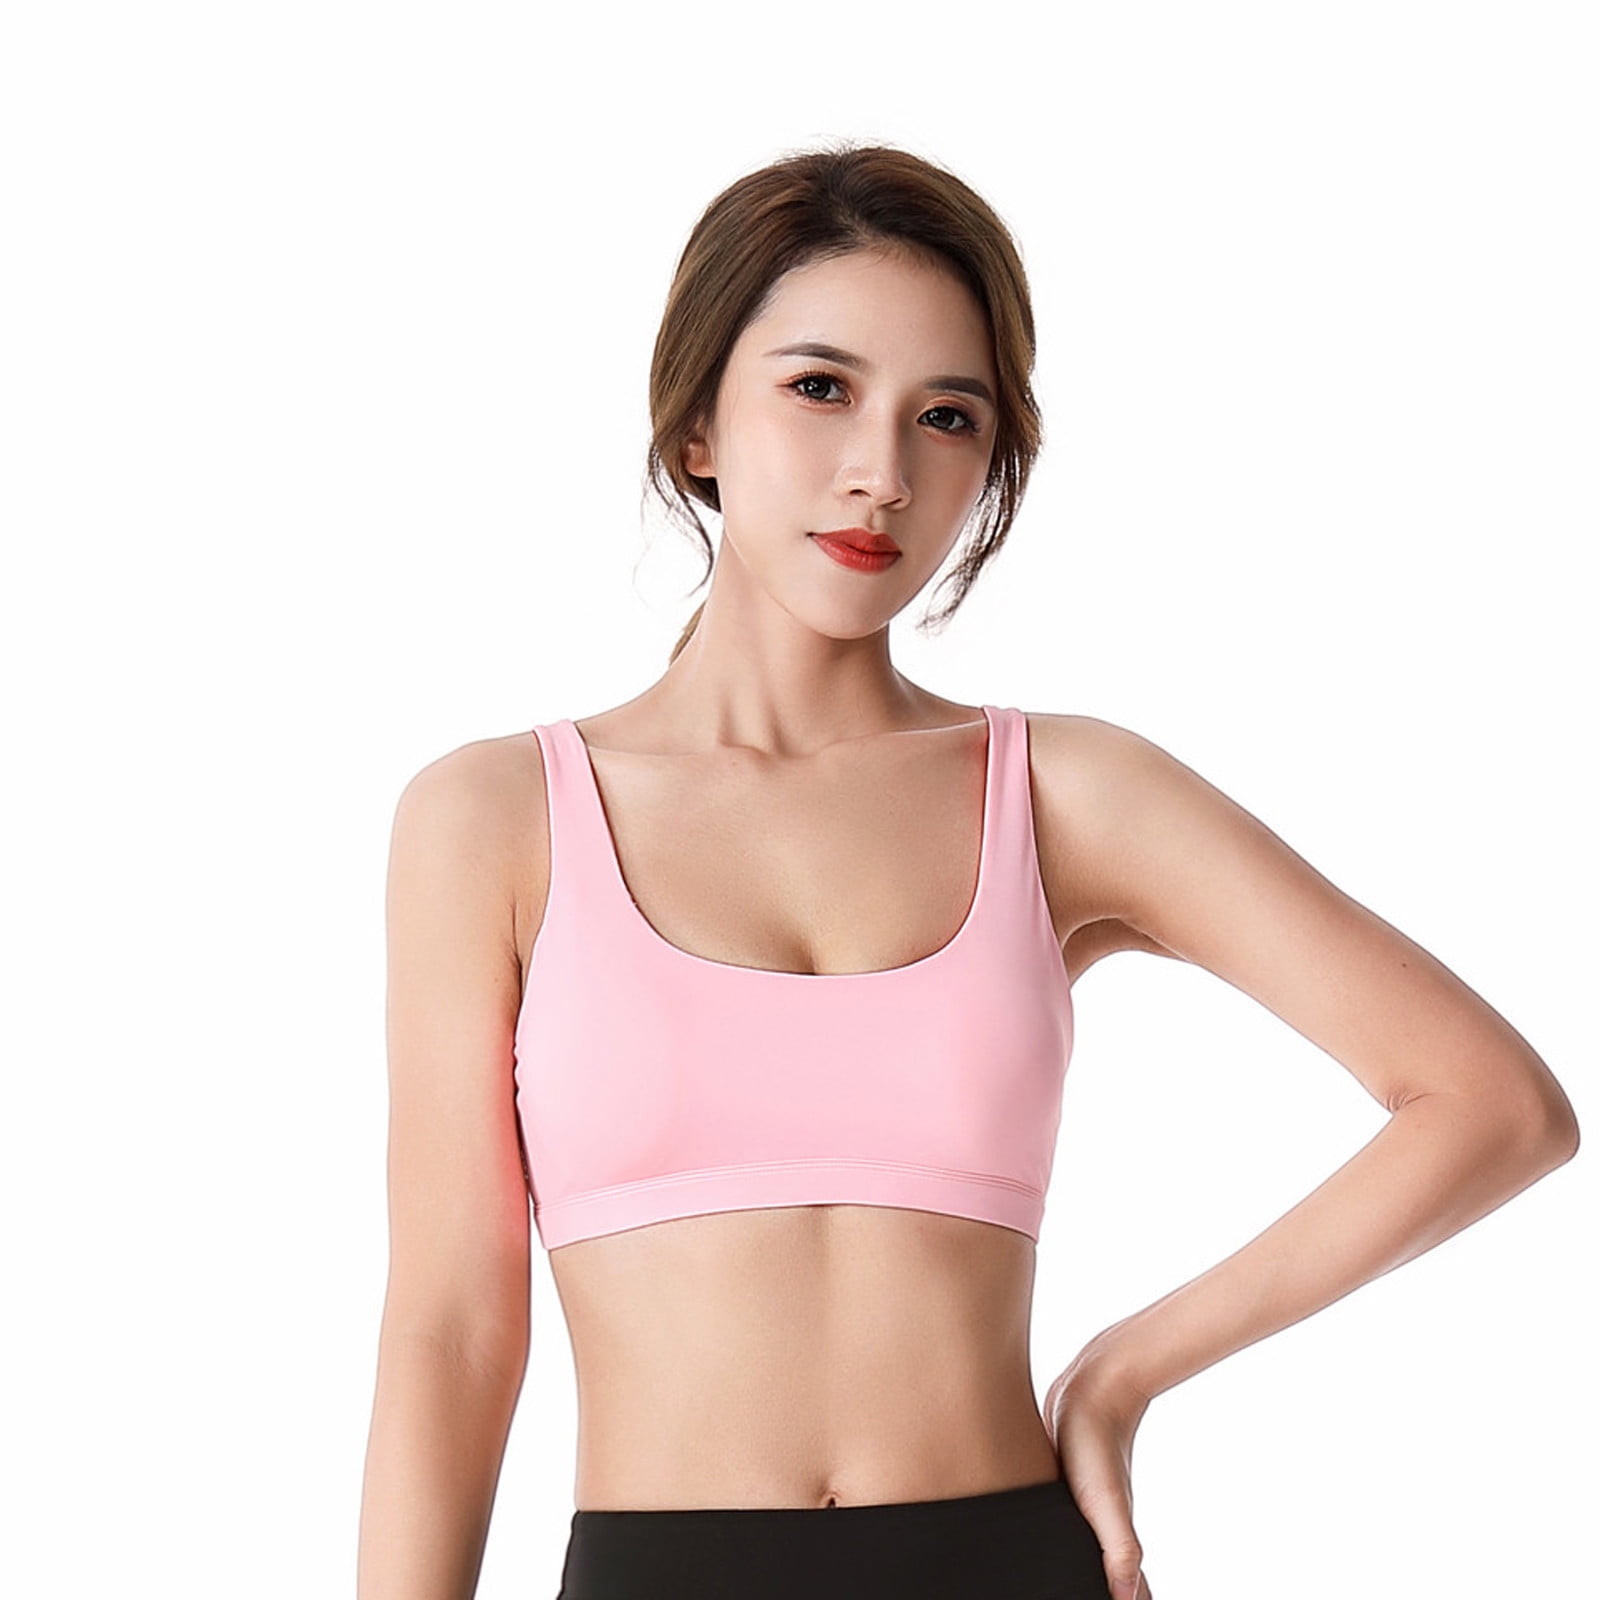 Spring Savings Clearance Items Home Deals! Zeceouar Sports Bras